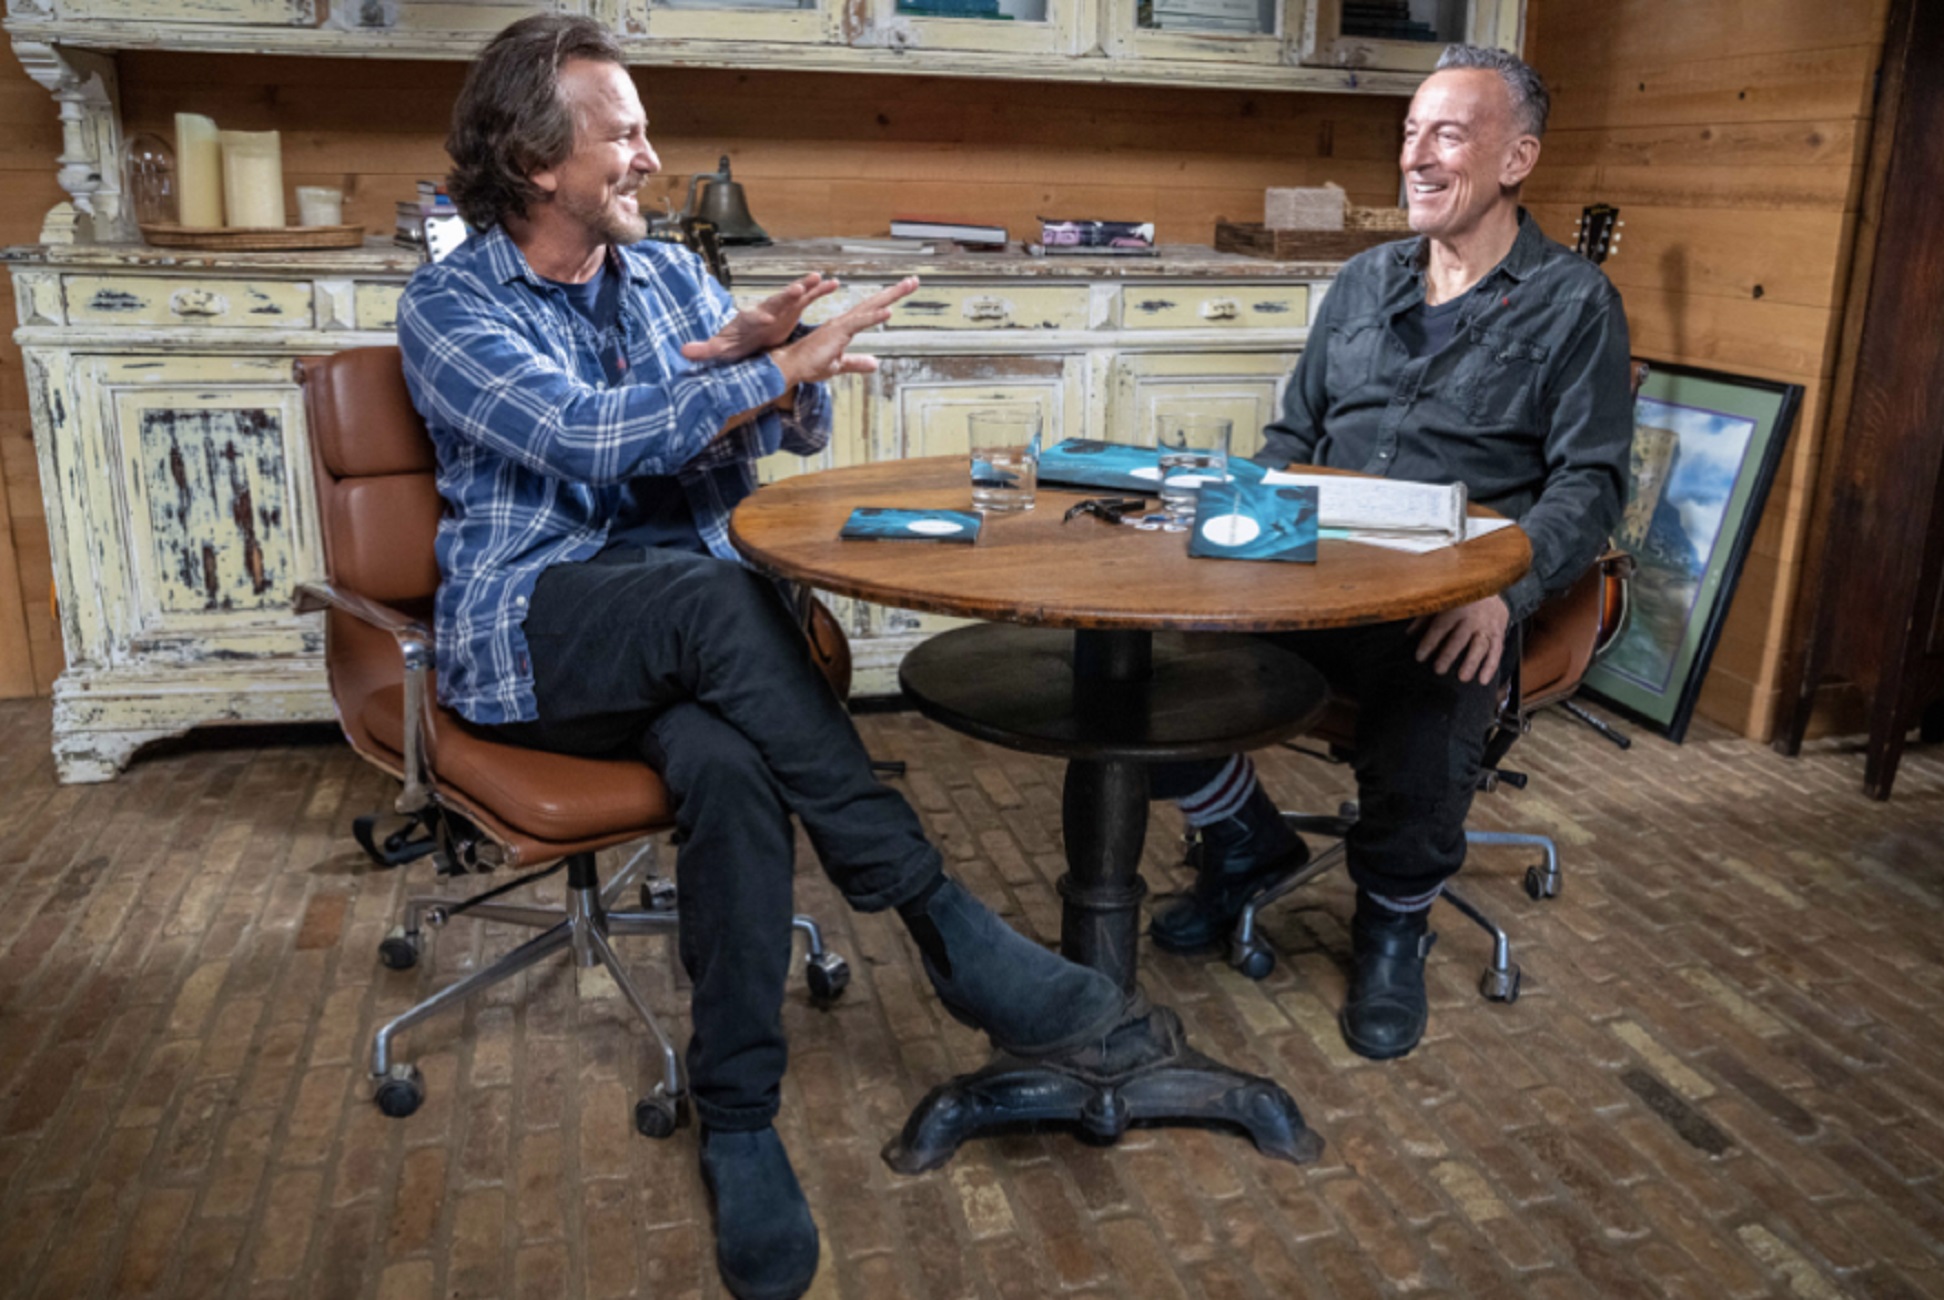 WATCH AN EXCLUSIVE, INTIMATE CONVERSATION WITH EDDIE VEDDER AND BRUCE SPRINGSTEEN